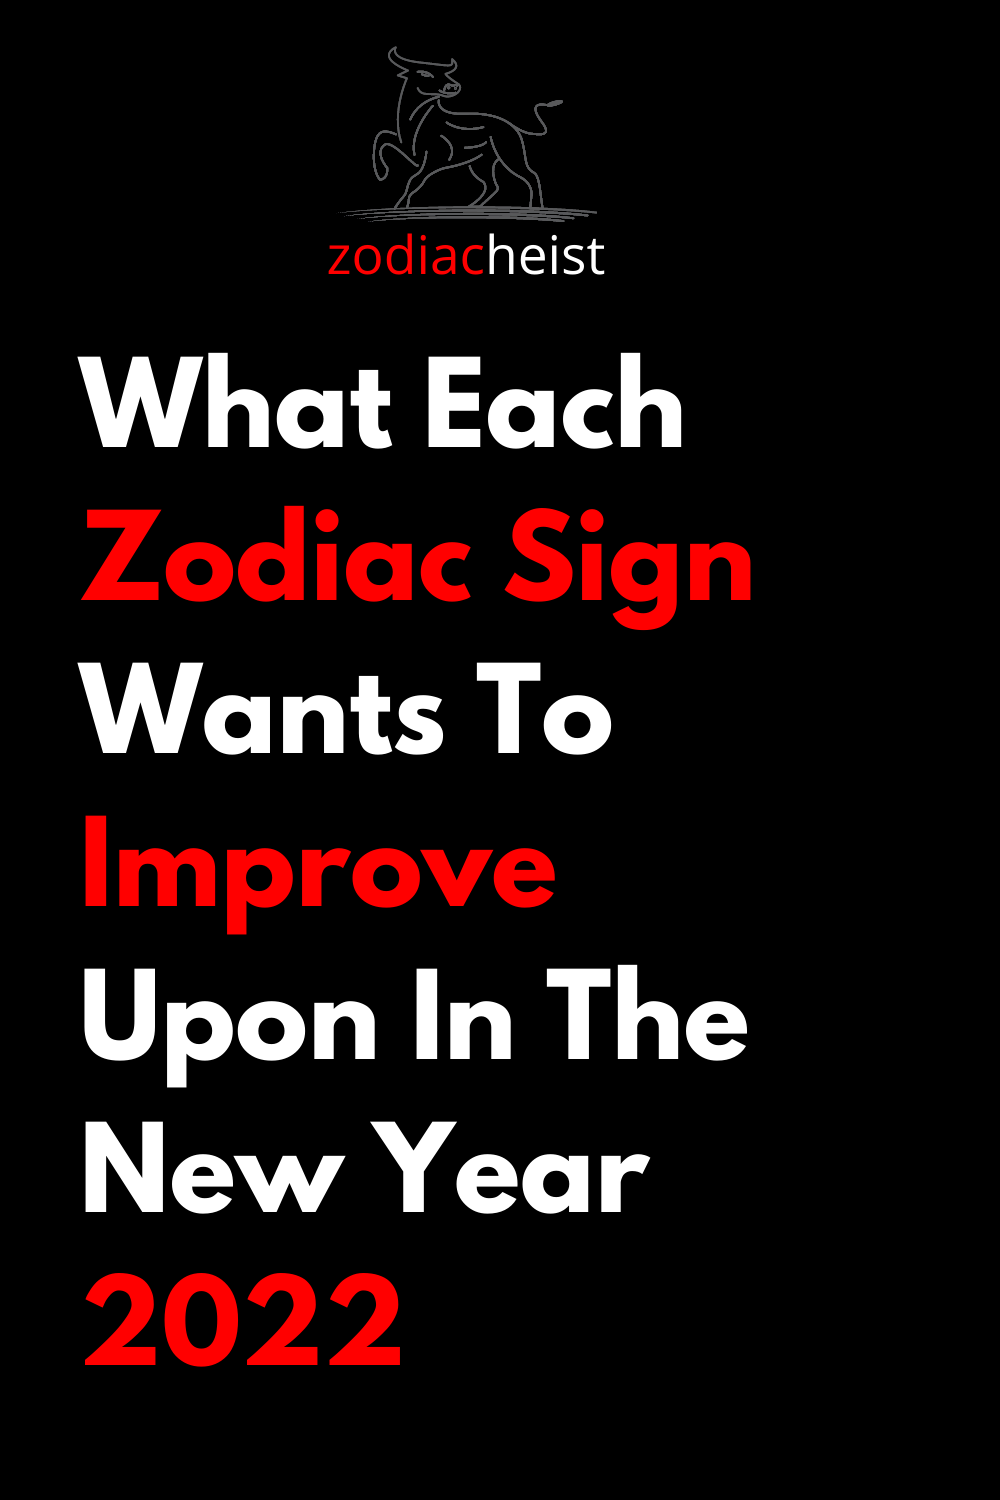 What Each Zodiac Sign Wants To Improve Upon In The New Year 2022